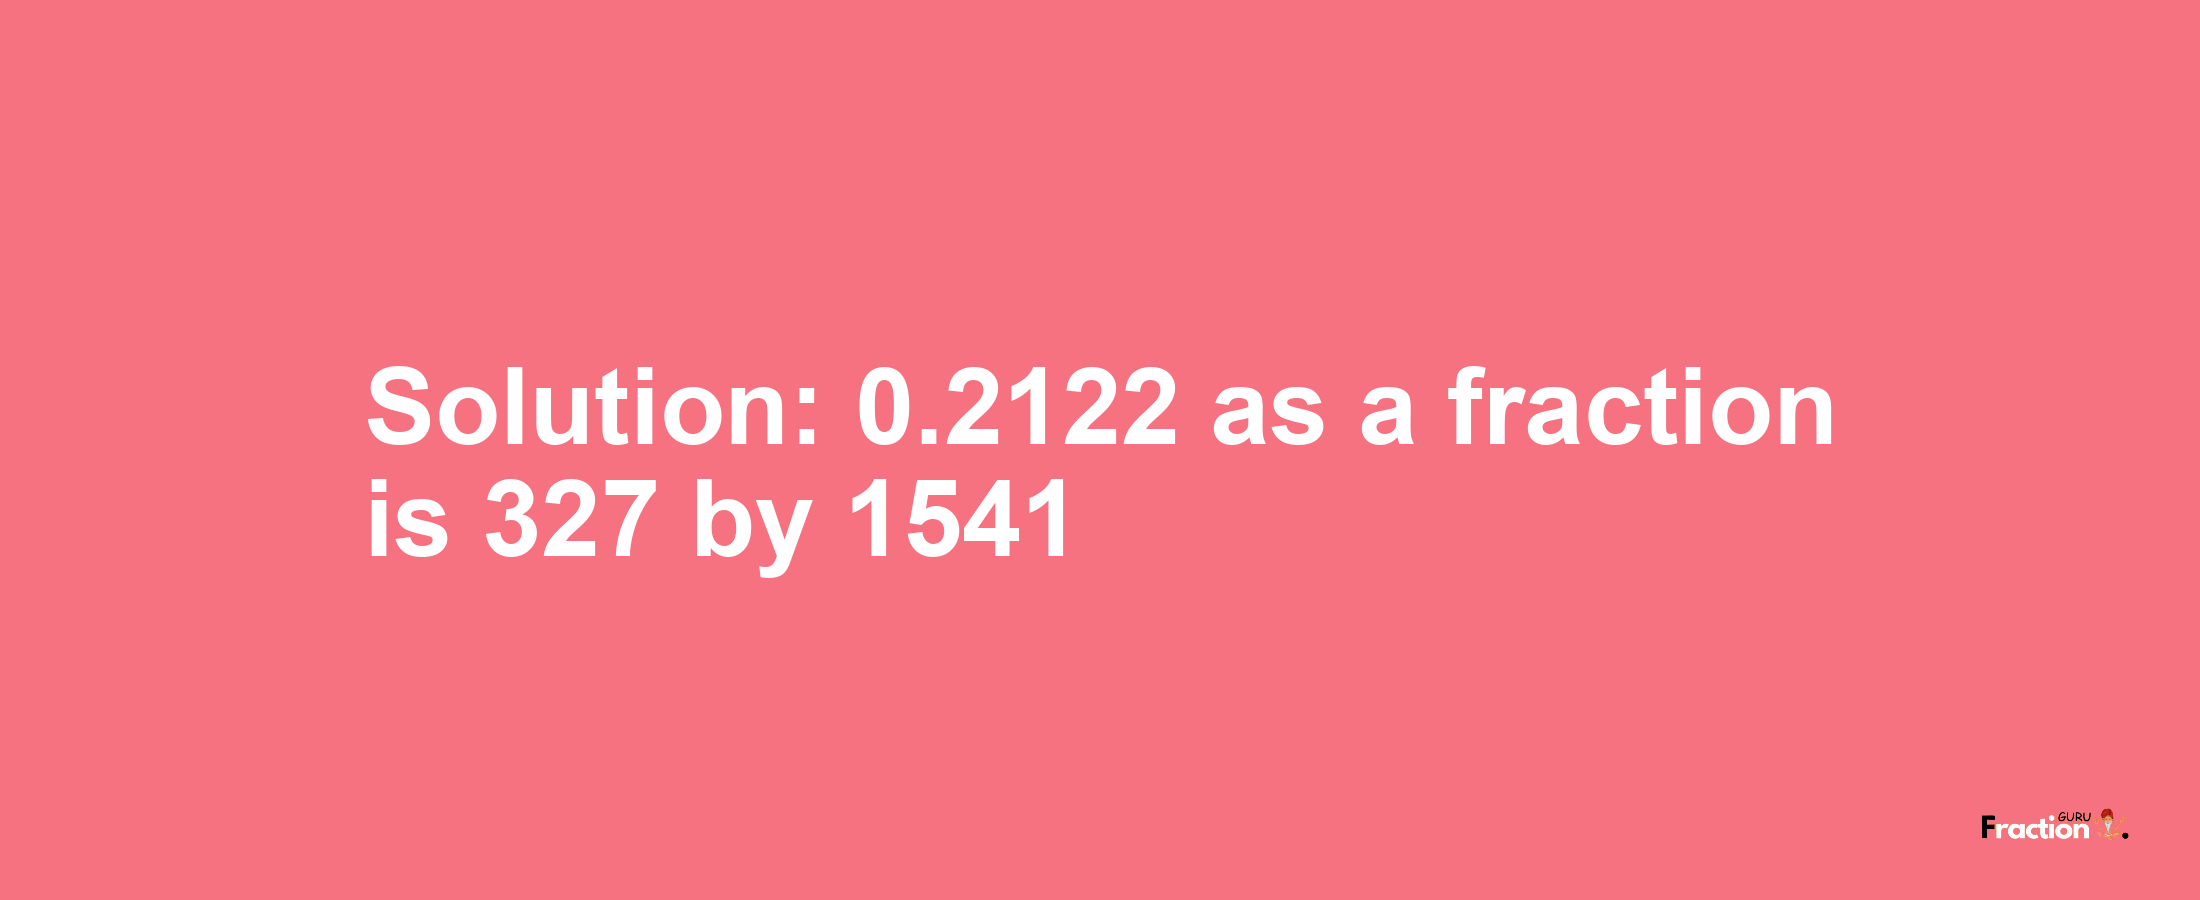 Solution:0.2122 as a fraction is 327/1541